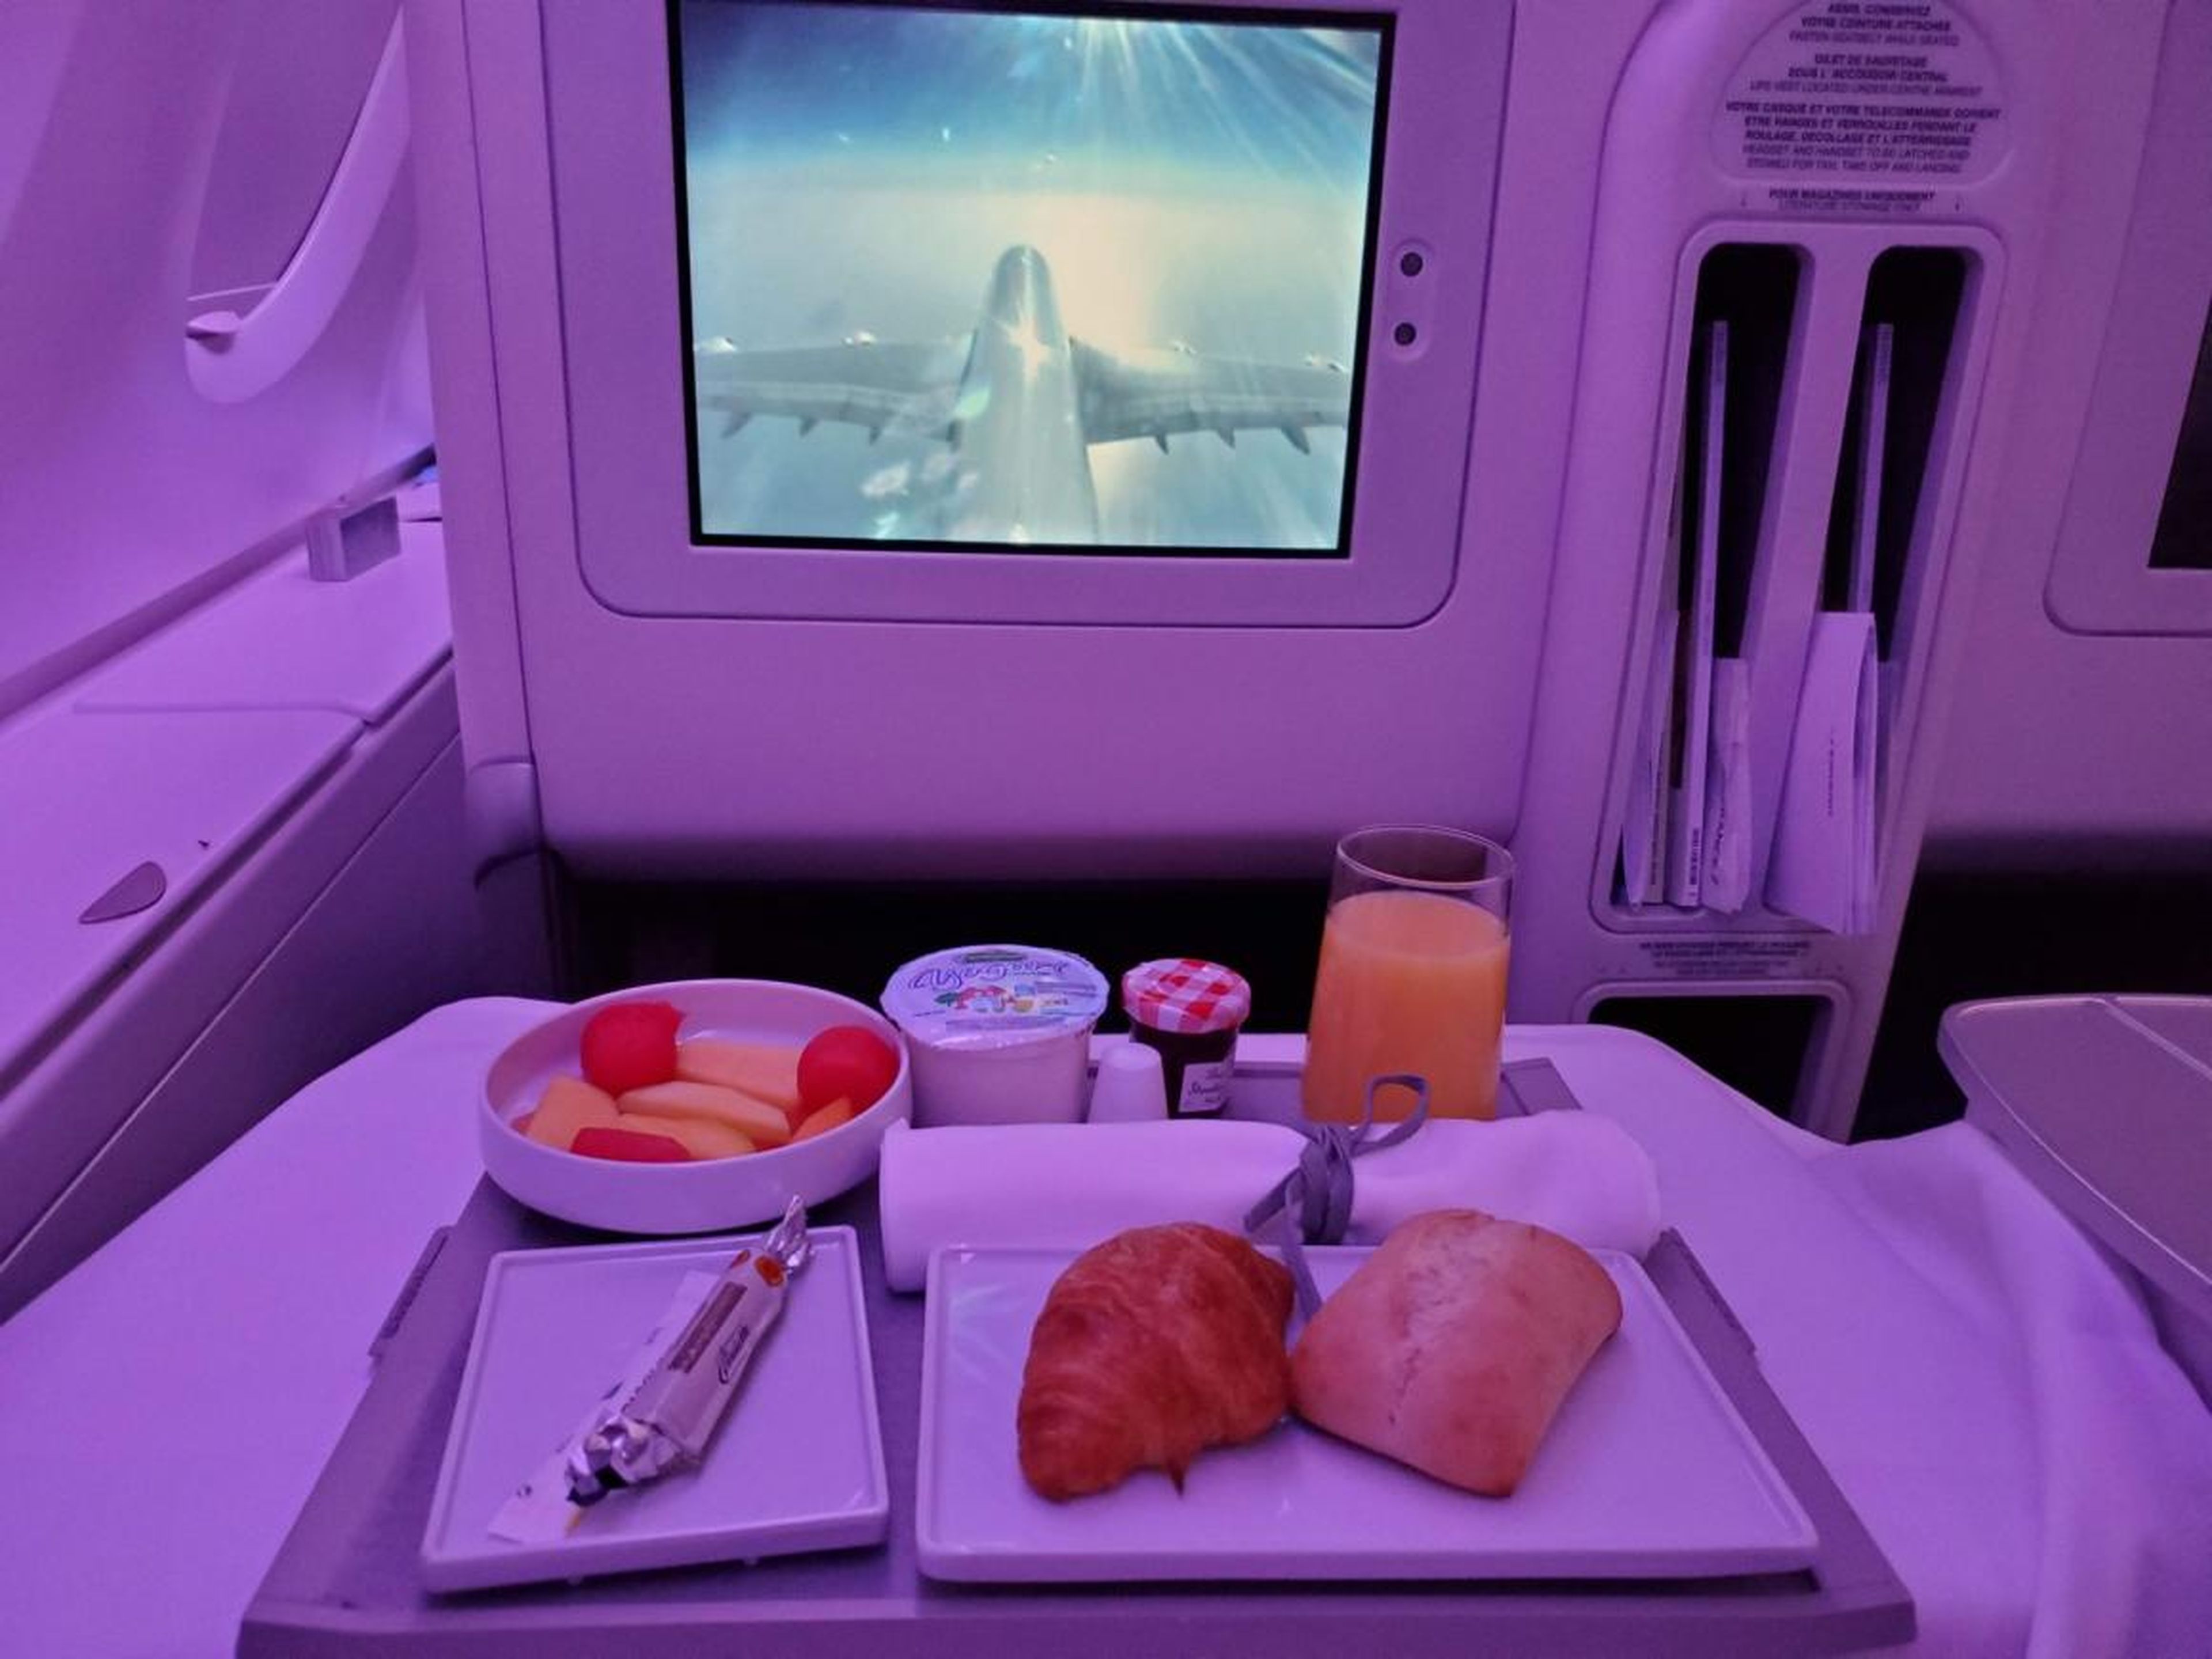 Before I knew it, breakfast was served. The croissant was warm, while the fruit salad and juice tasted fresh. I always struggle with wanting to eat breakfast on overnight flights when my body thinks it's 3 a.m., but this was a